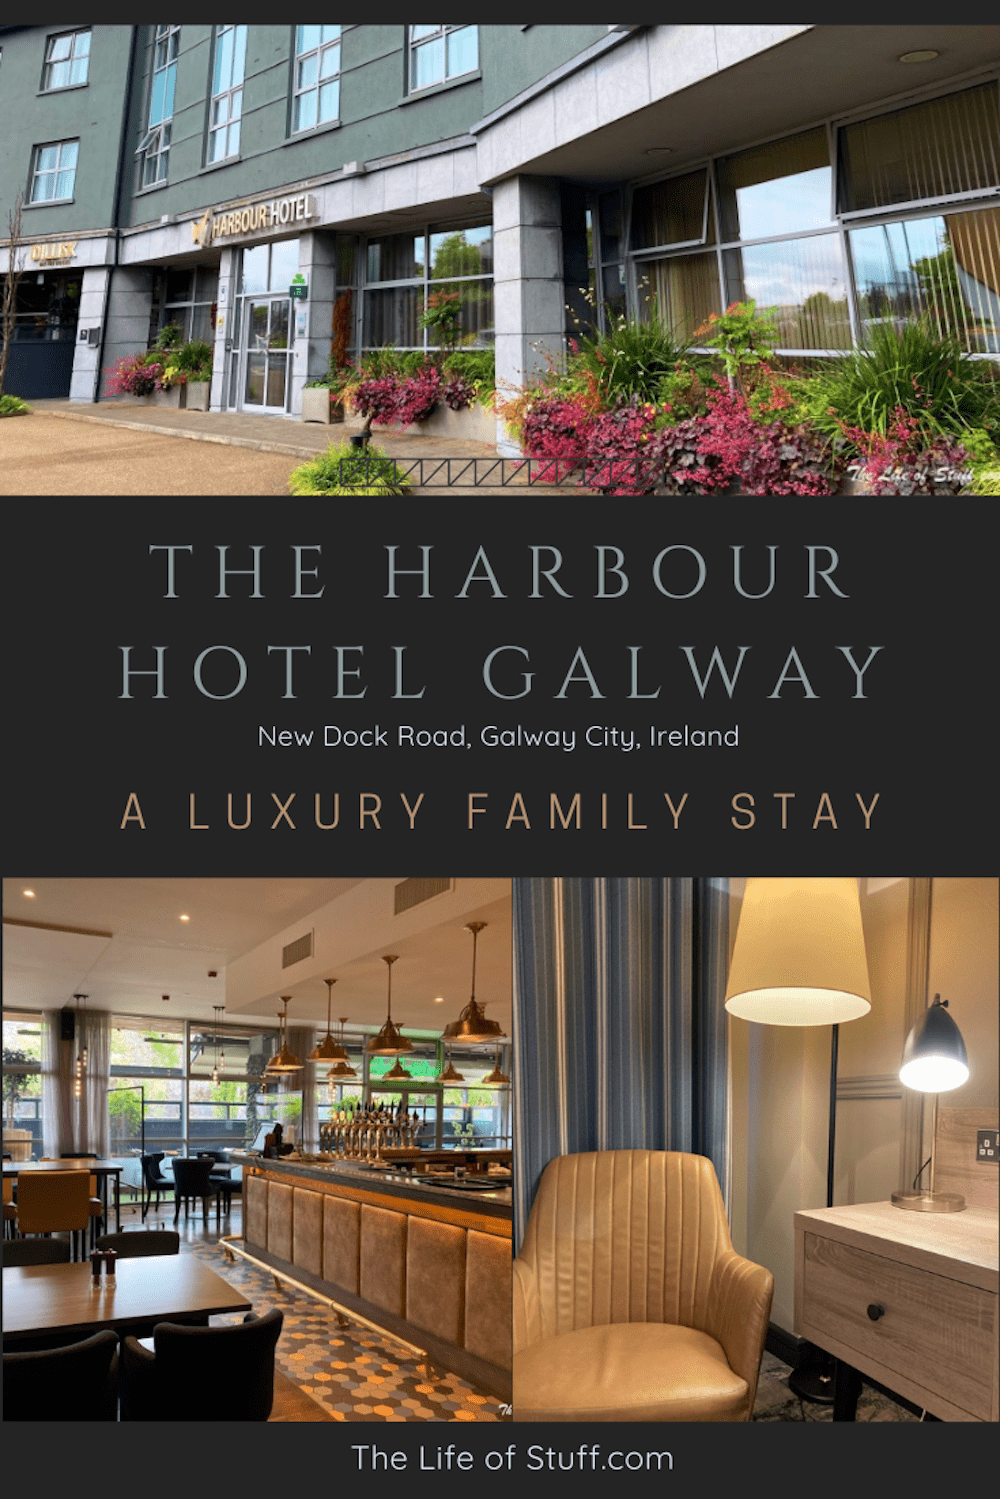 The Harbour Hotel Galway - A Luxury Four-Star Family Stay - The Life of Stuff